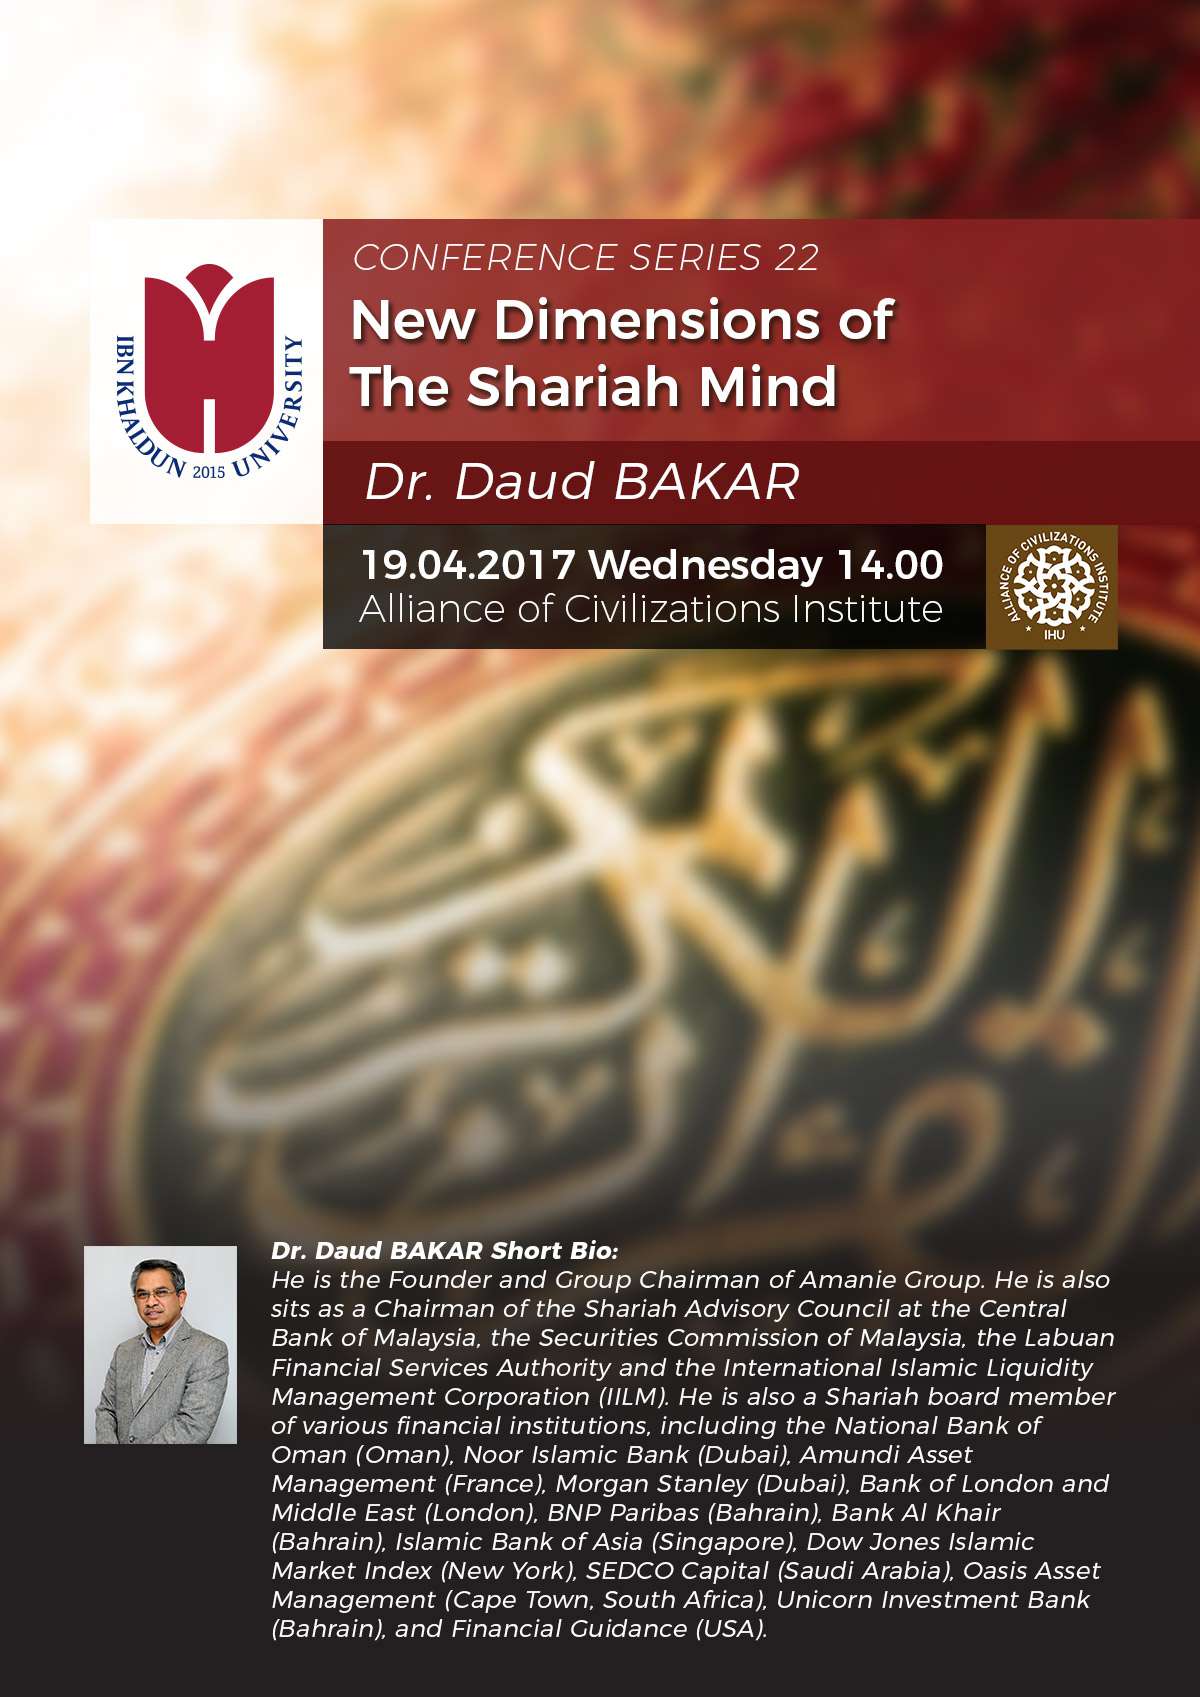 New Dimensions of The Shariah Mind